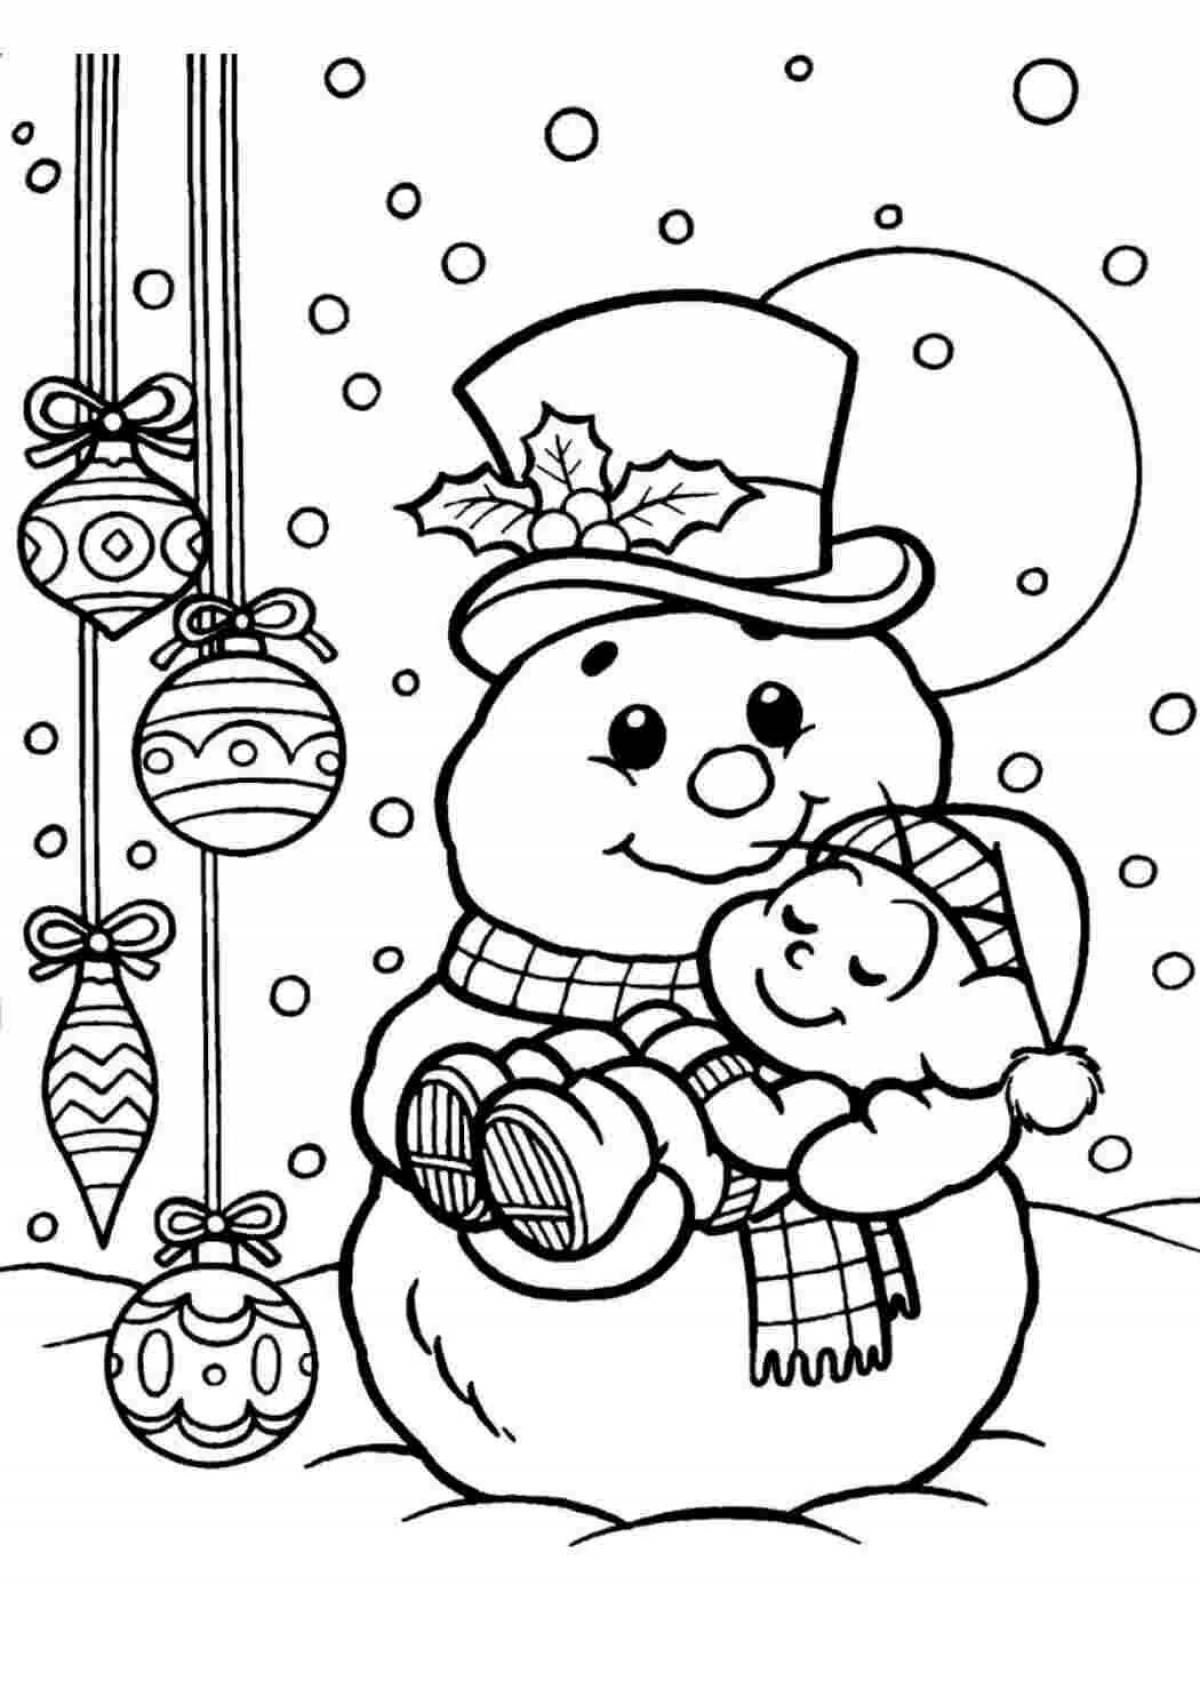 Animated Christmas snowman coloring book